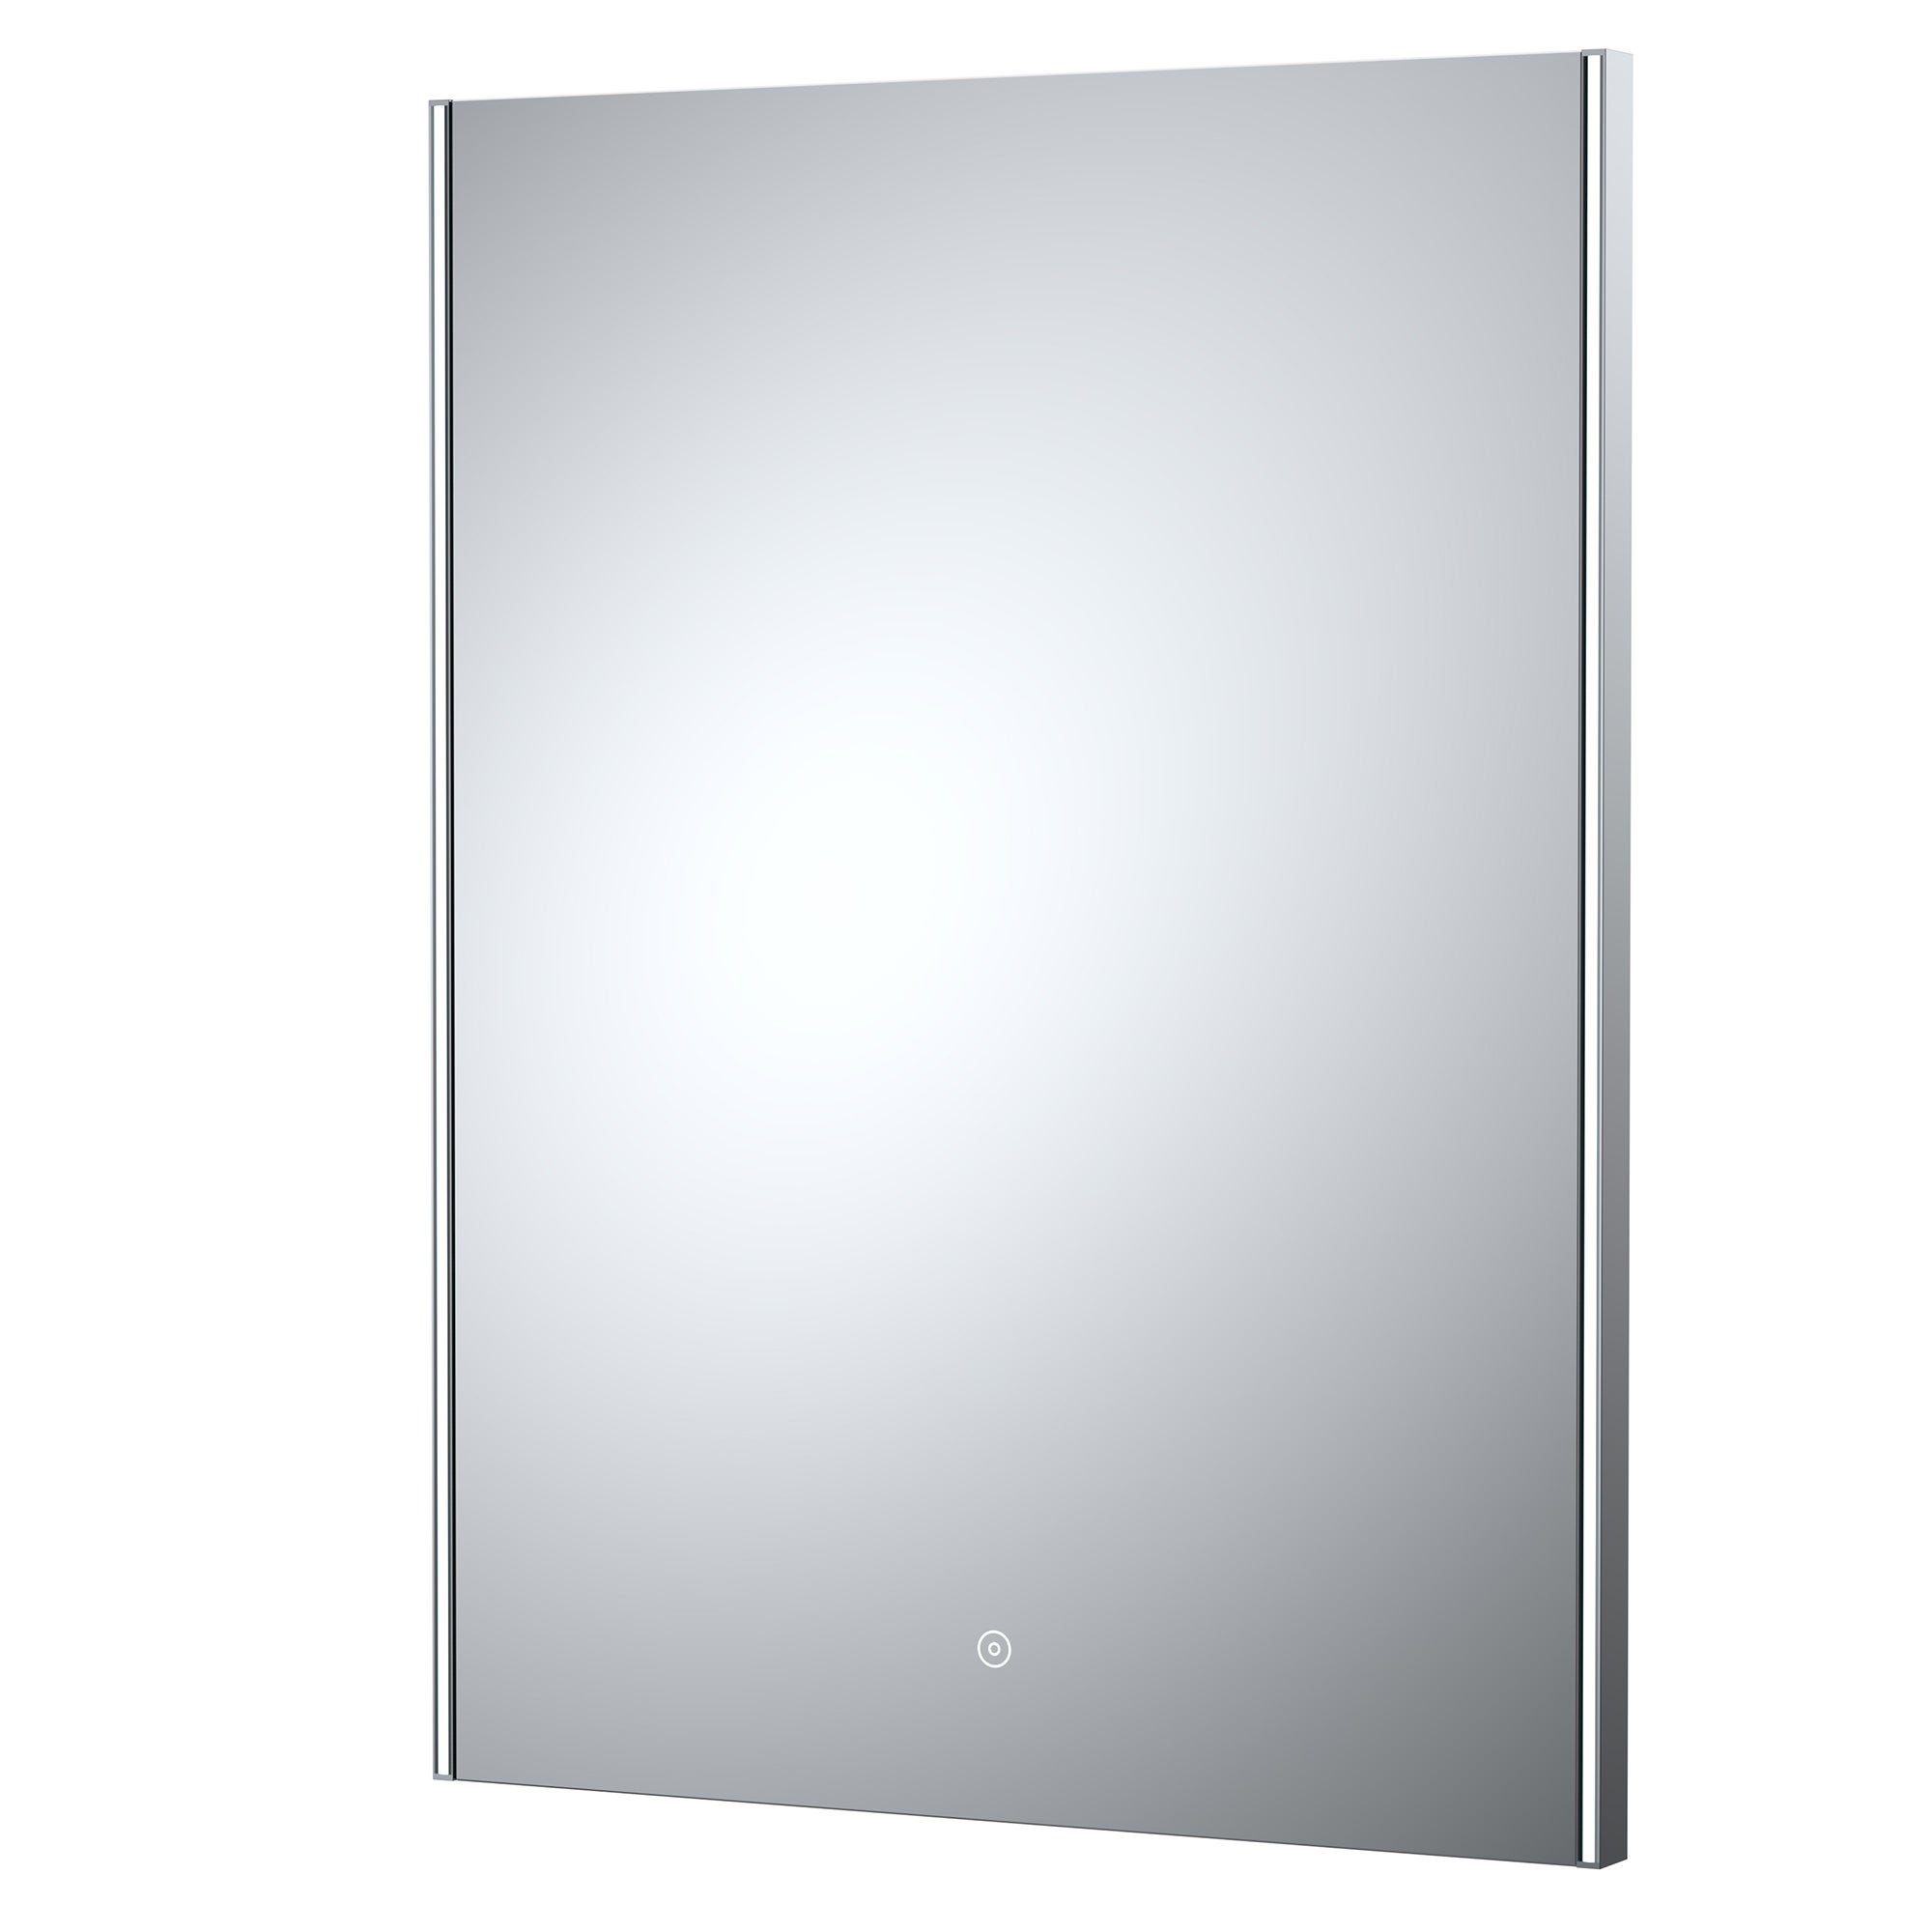 Ambient Large Touch Sensor Mirror Silver